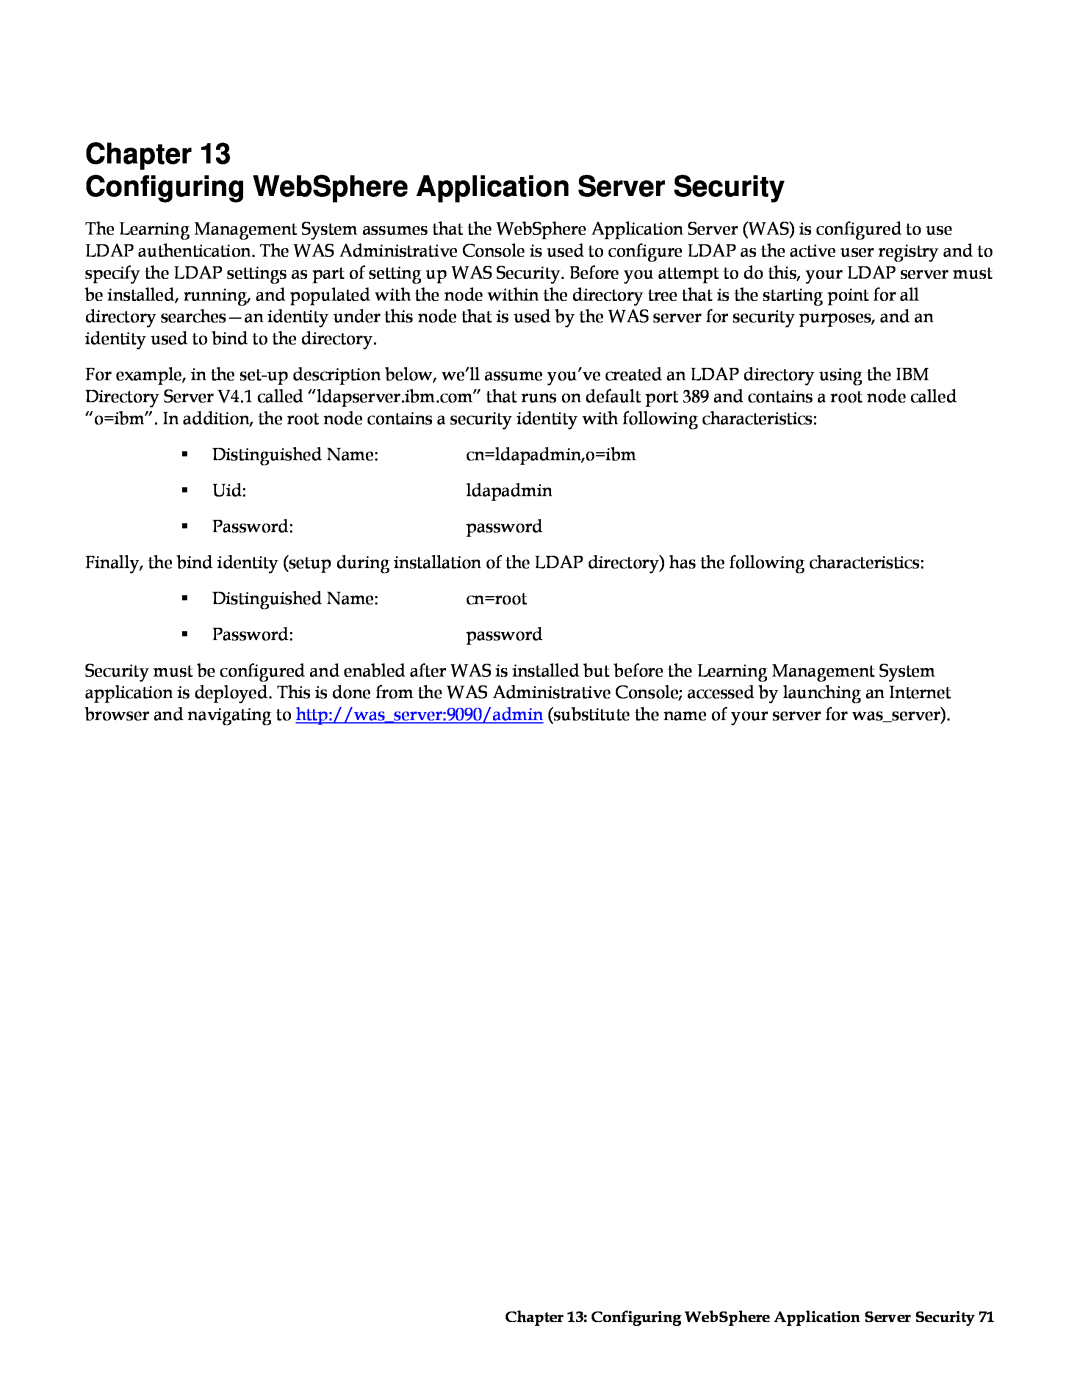 IBM G210-1784-00 manual Chapter Configuring WebSphere Application Server Security 